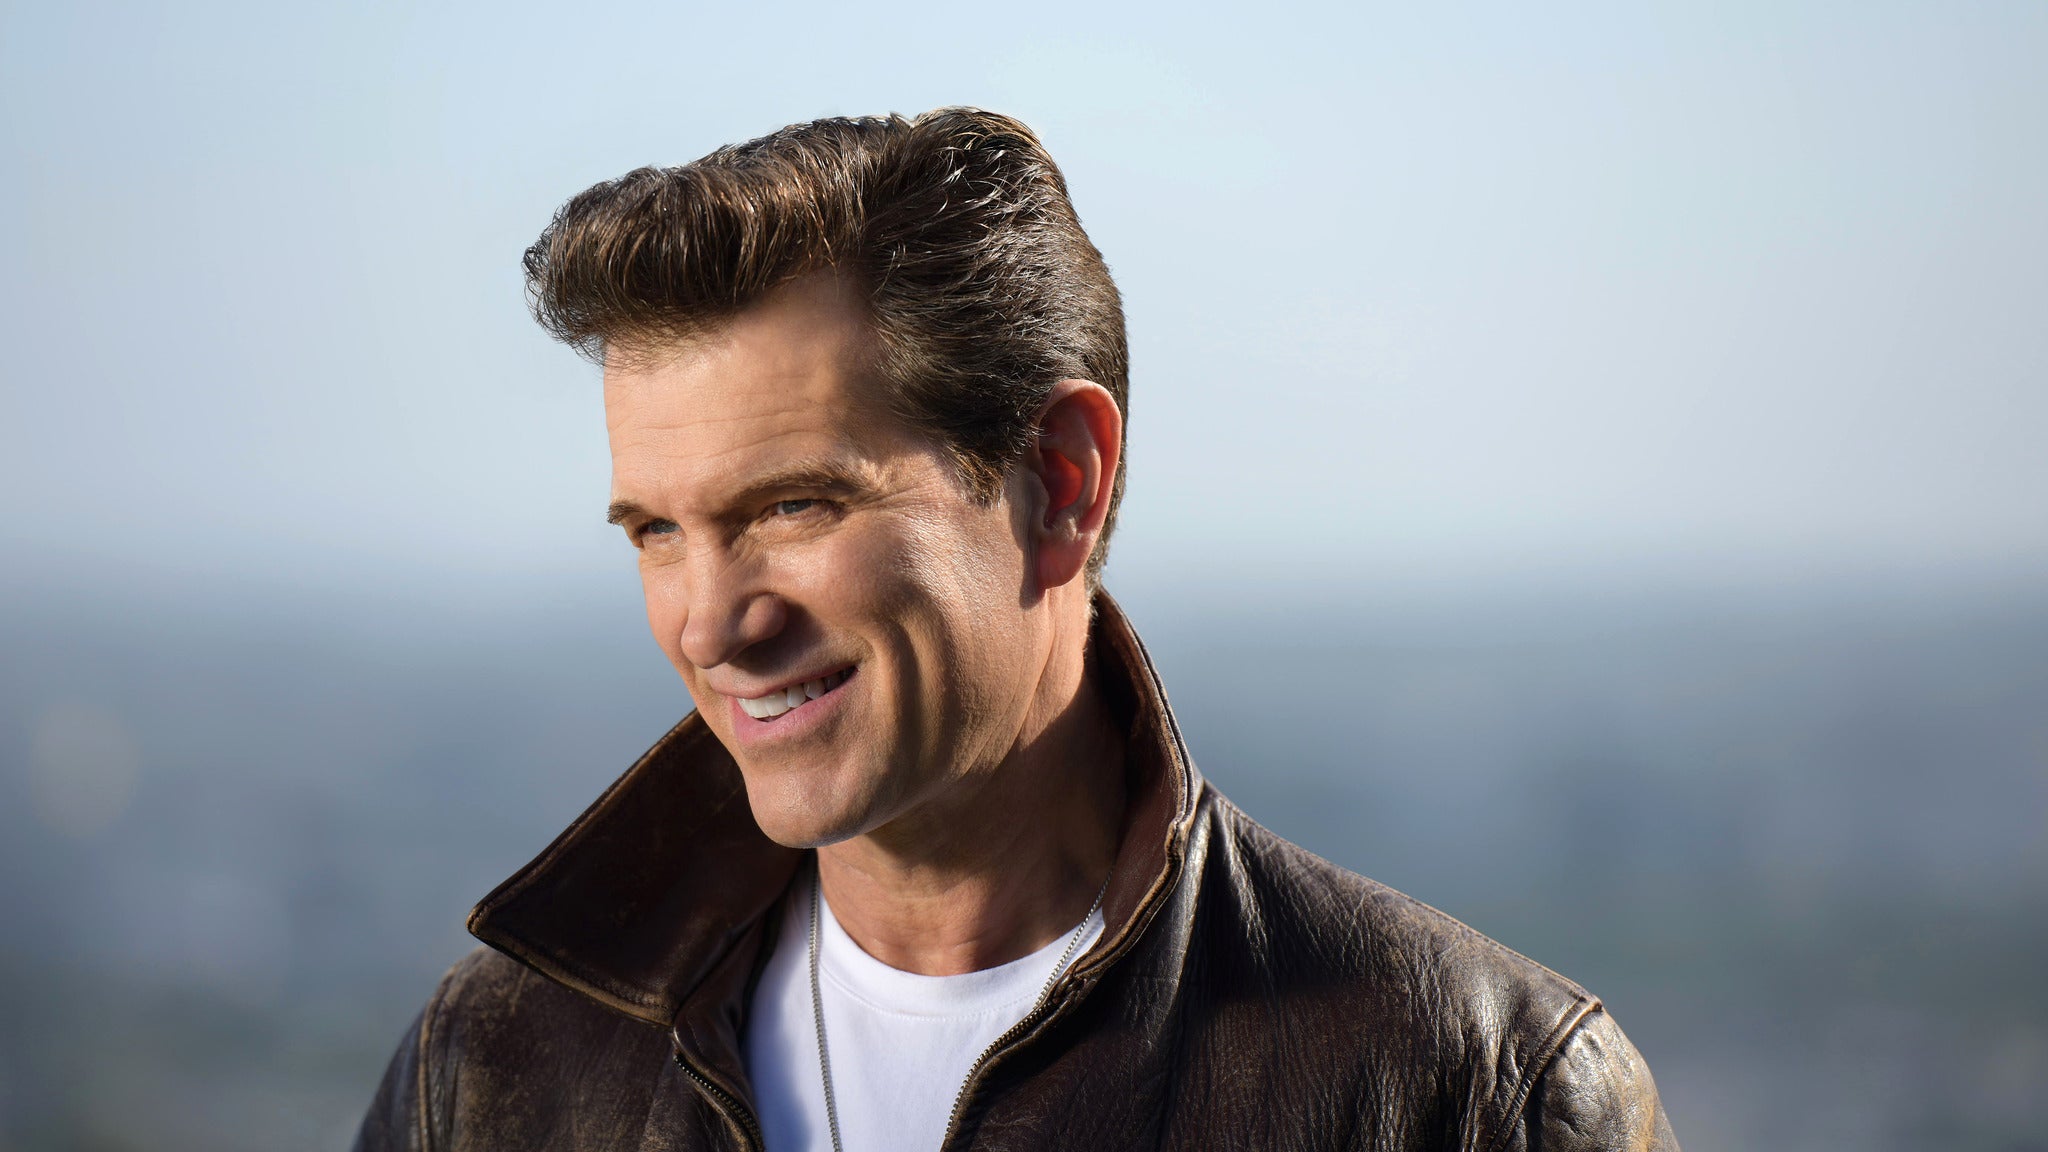 Chris Isaak: It's Almost Christmas Tour presale code for event tickets in Reno, NV (Grand Sierra Resort and Casino)